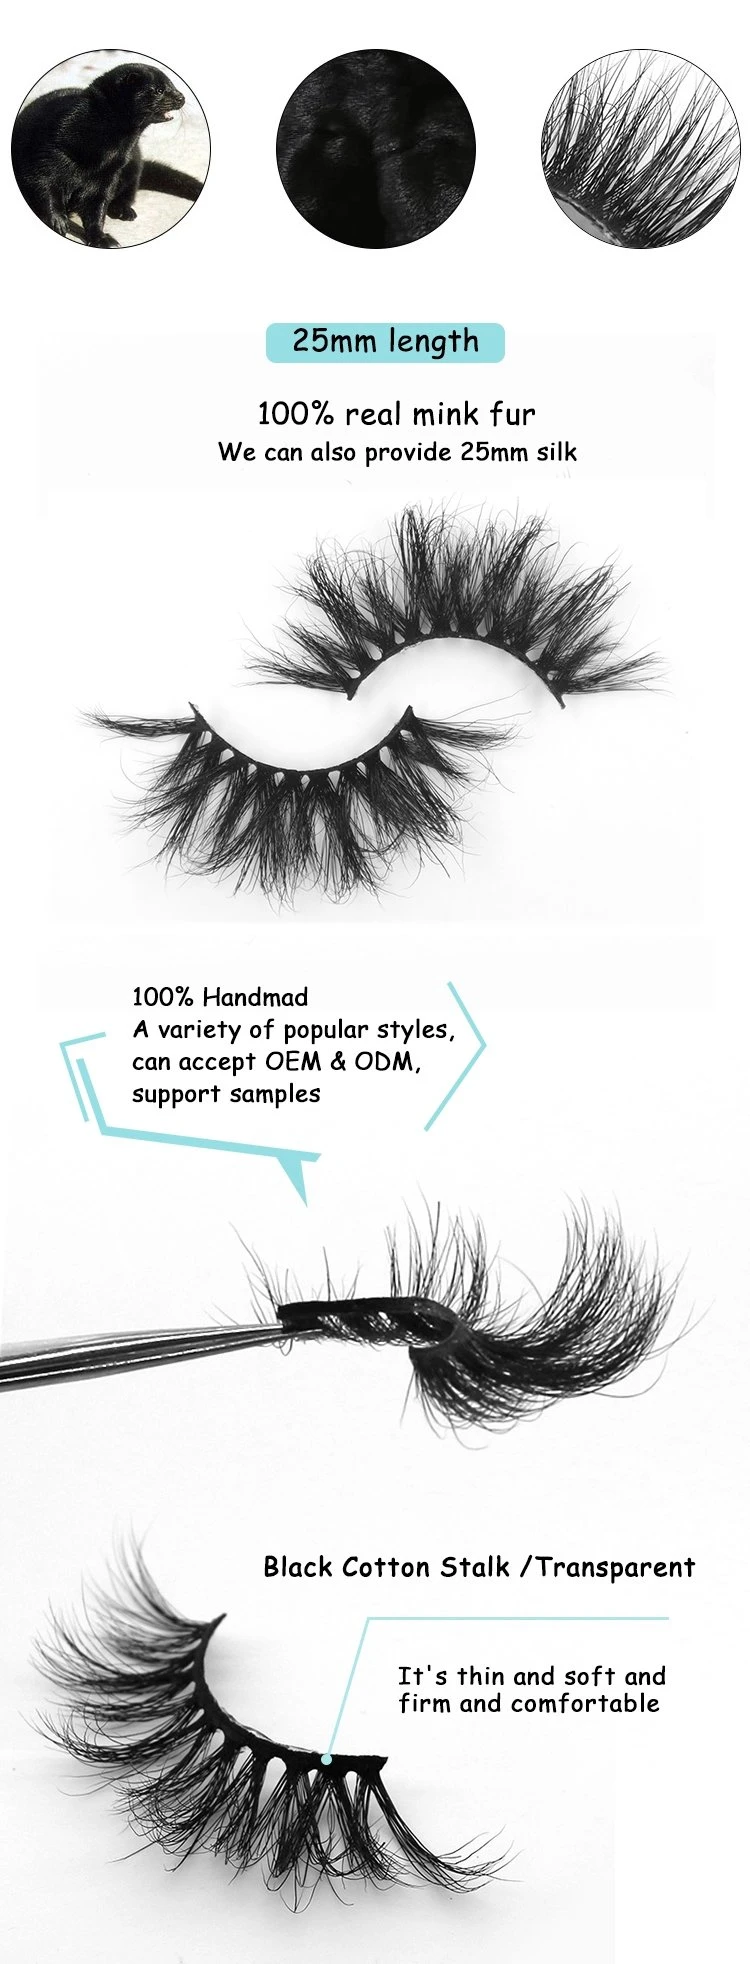 Cruelty Free Luxury Fluffy Cheap Lashes Faux Mink Eyelashes Mink Eyelashes Private Label 3D Mink Lashes